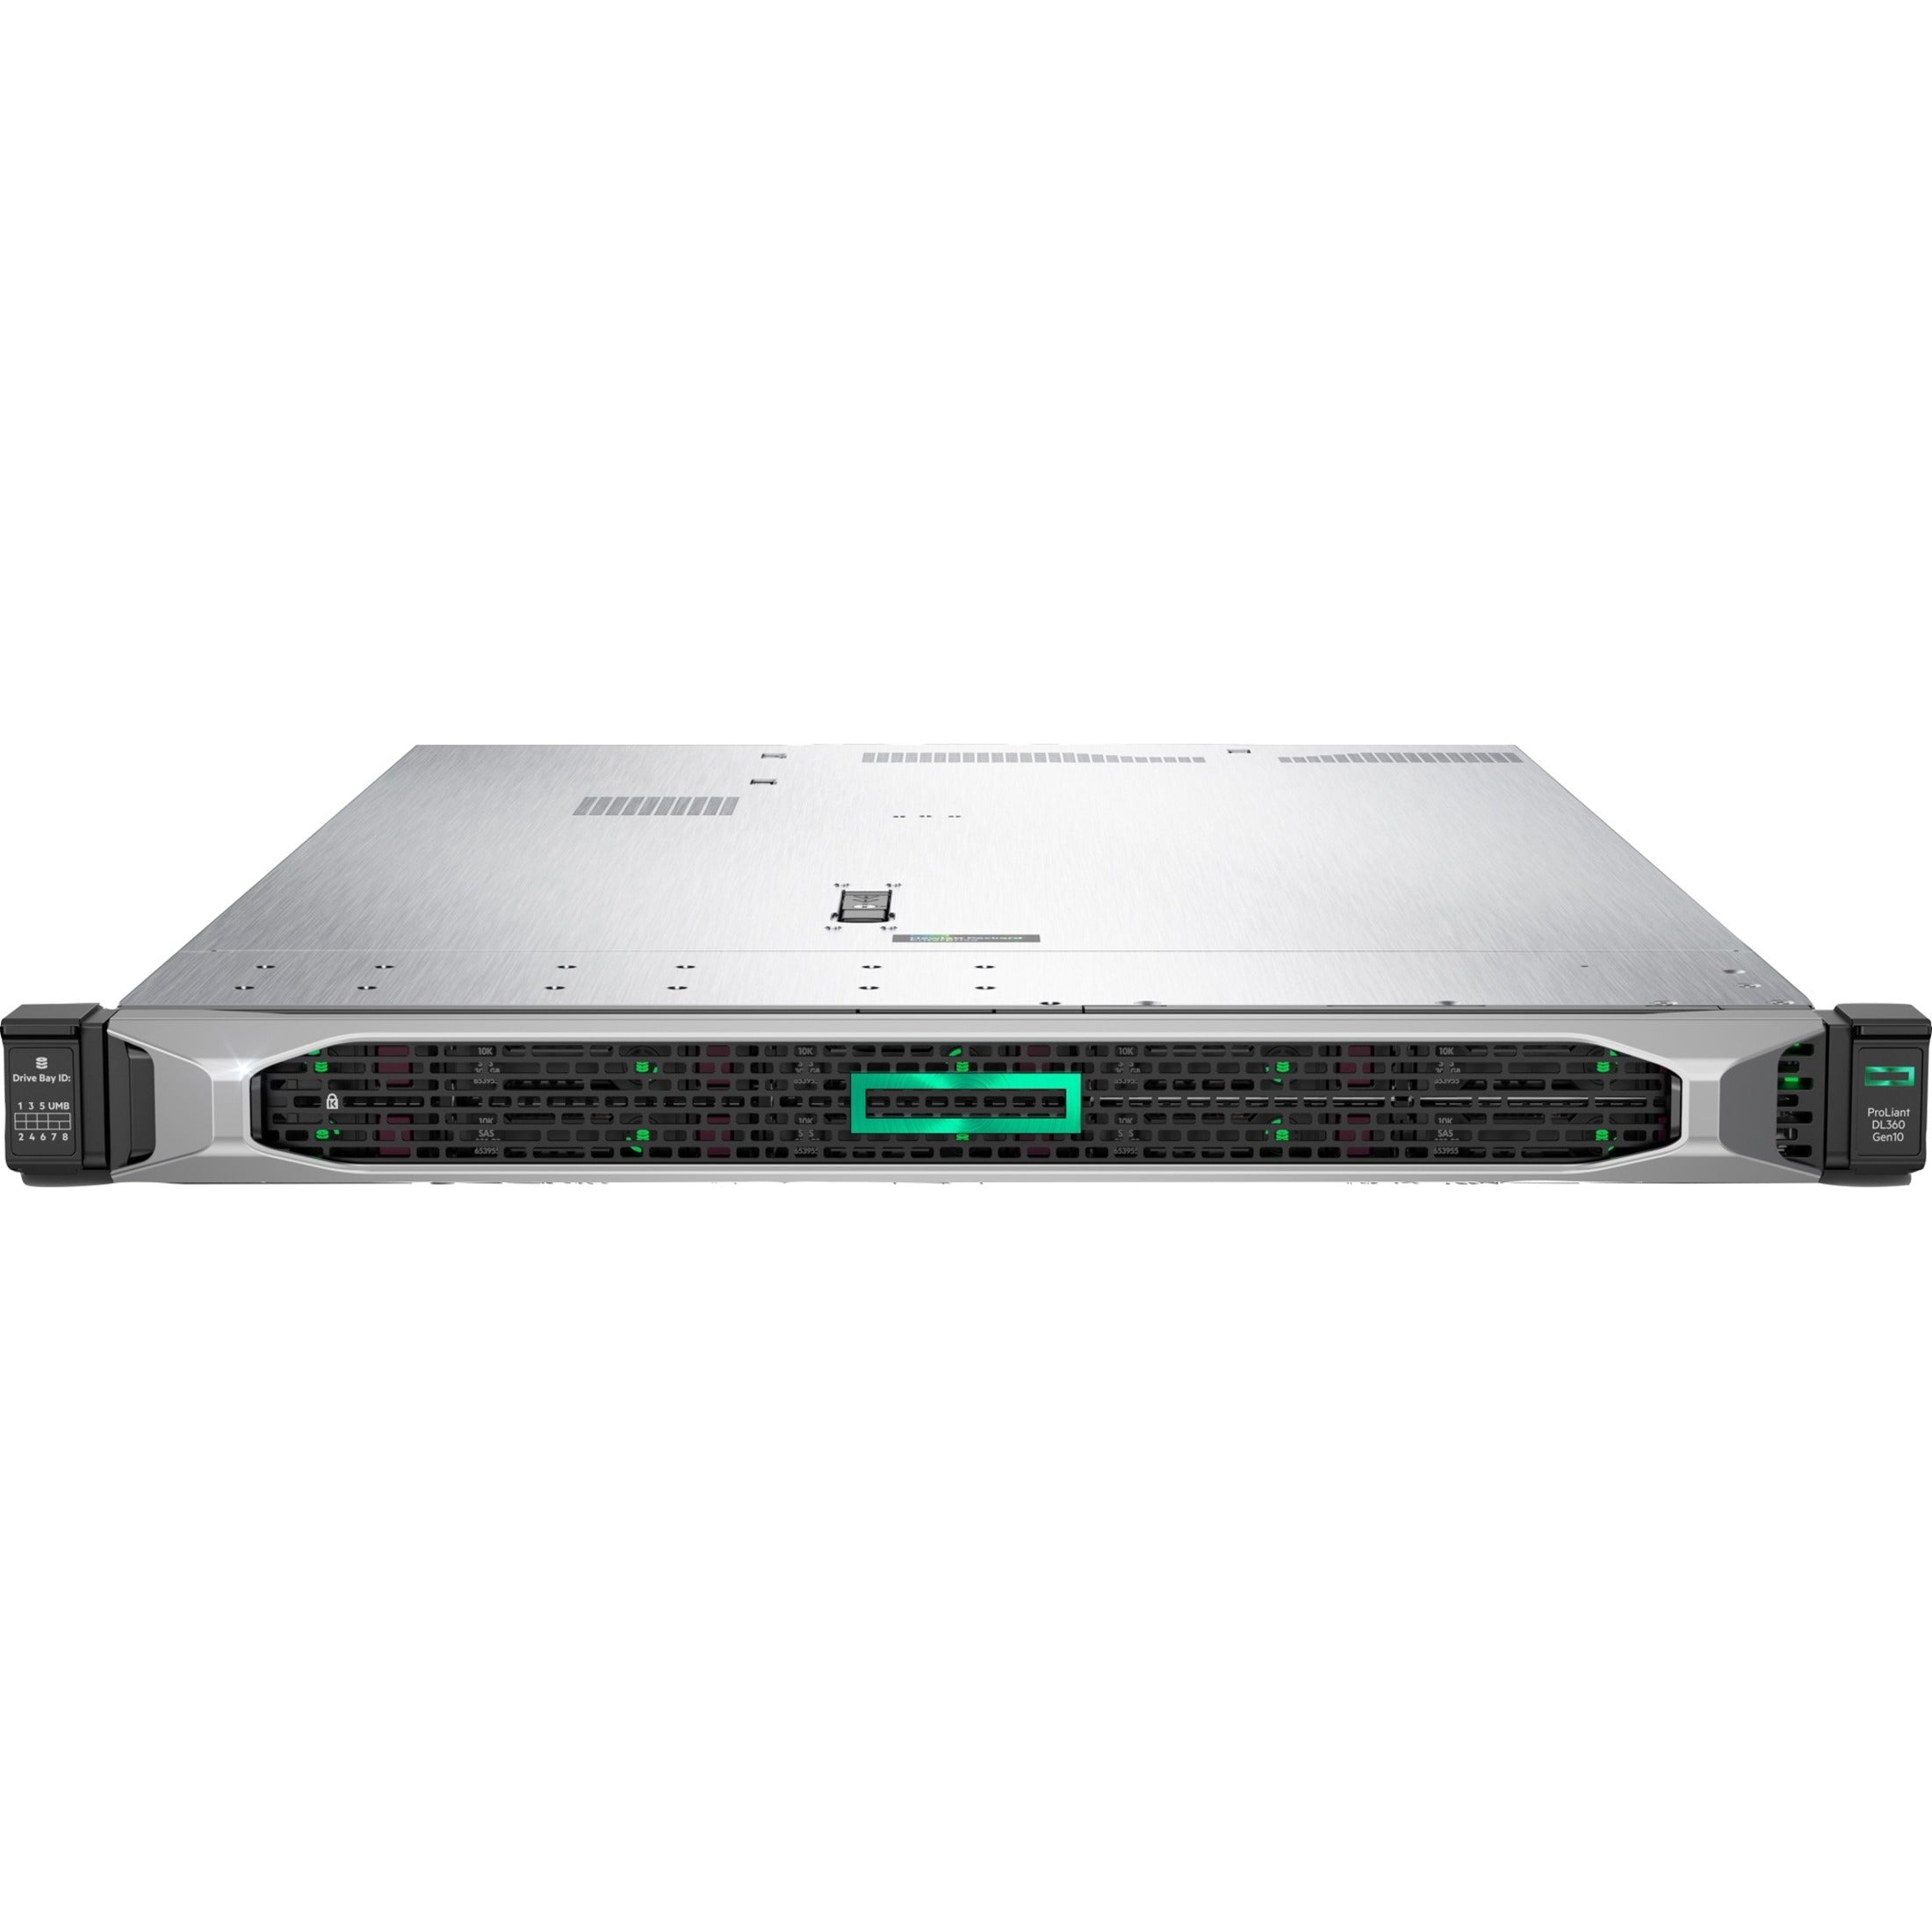 HPE ProLiant DL360 Gen10 6248R 1P 32GB-R S100i NC 8SFF 800W PS Server [Discontinued]